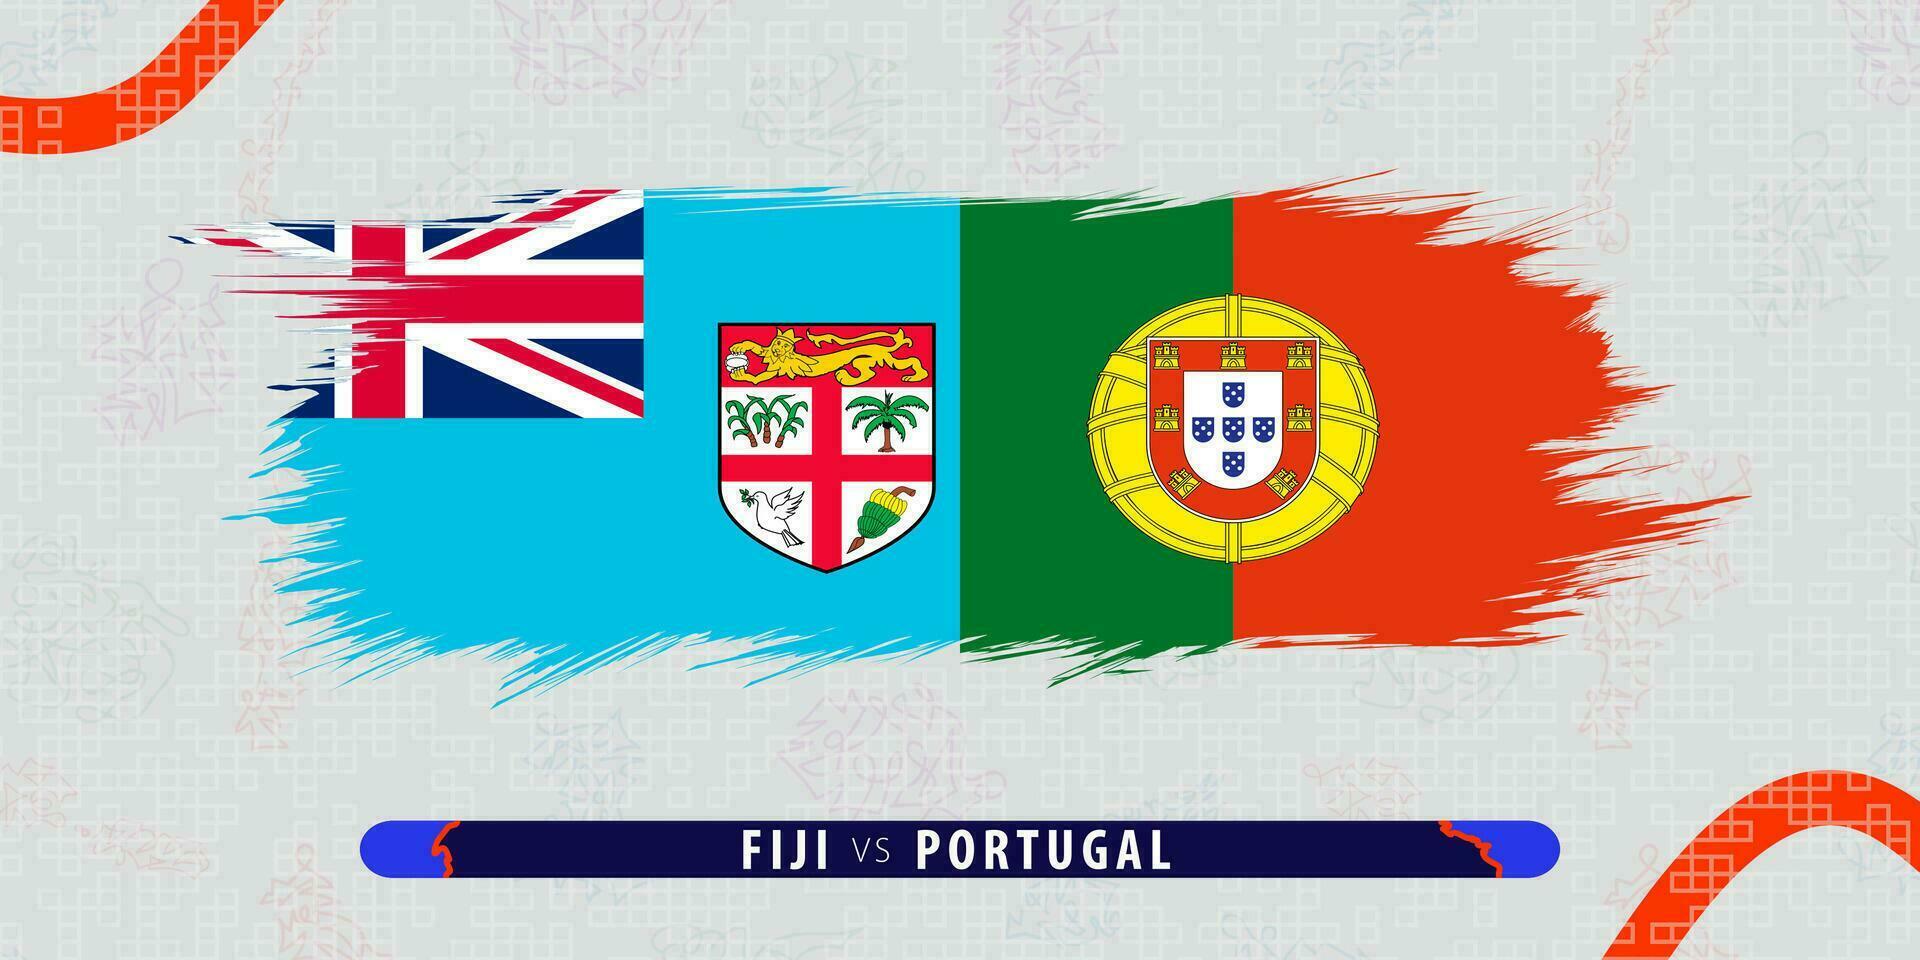 Fiji vs Portugal, international rugby match illustration in brushstroke style. Abstract grungy icon for rugby match. vector